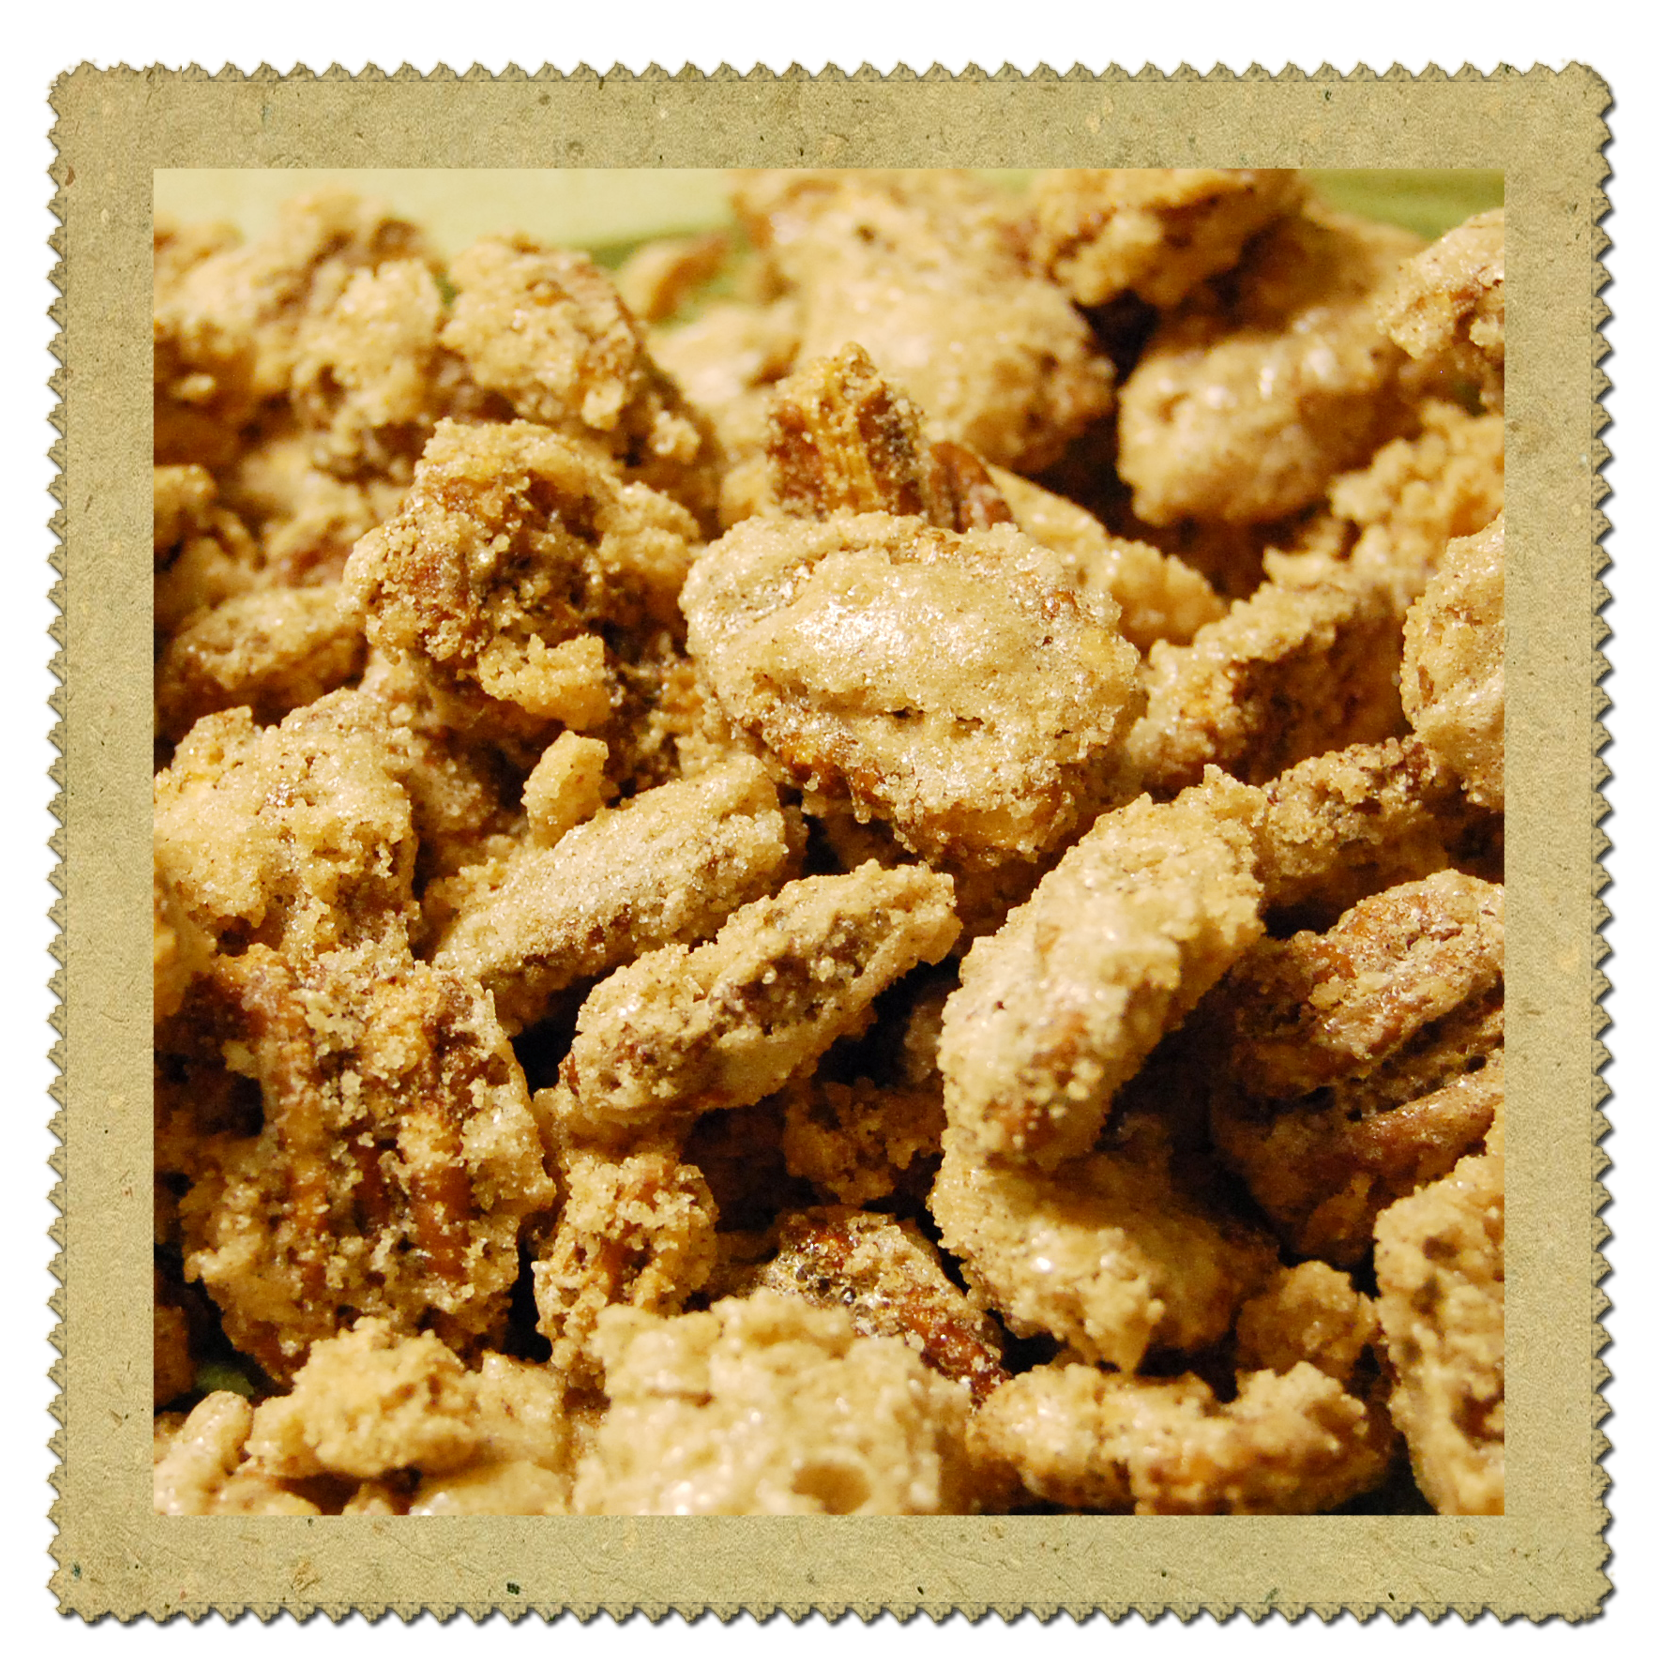 Candied Pecans!  Do not copy image.